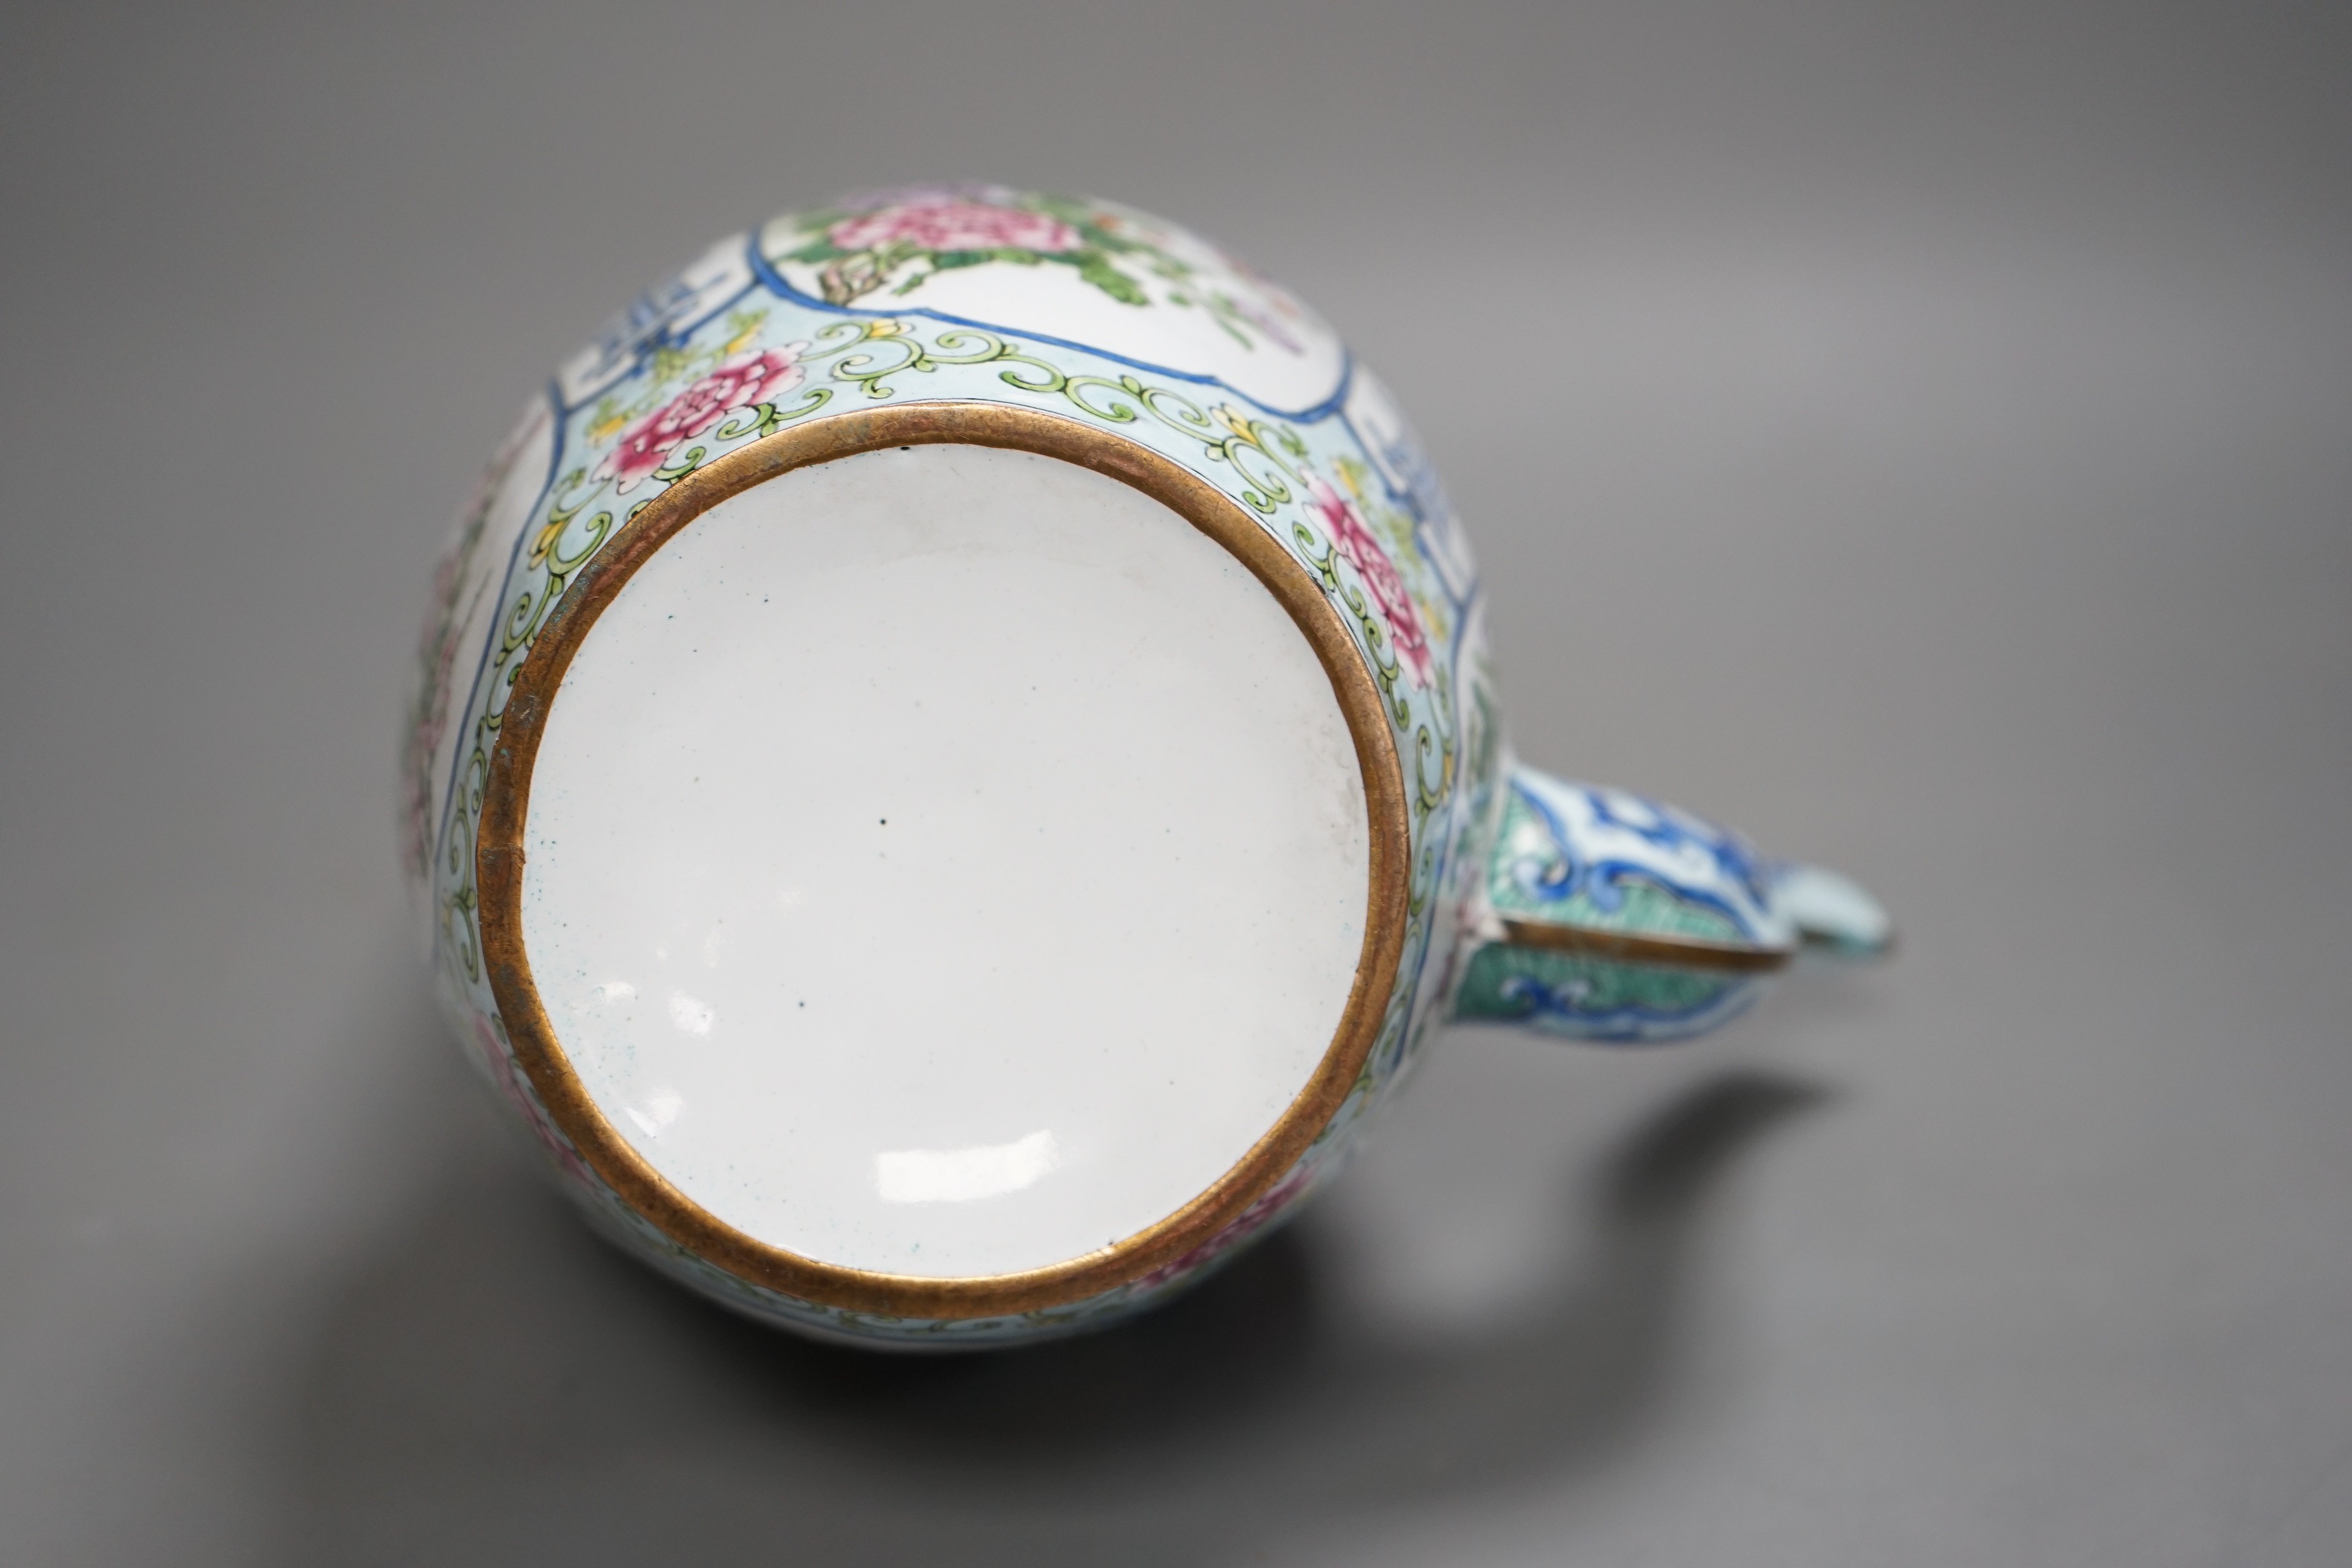 A Chinese Canton enamel wine pot